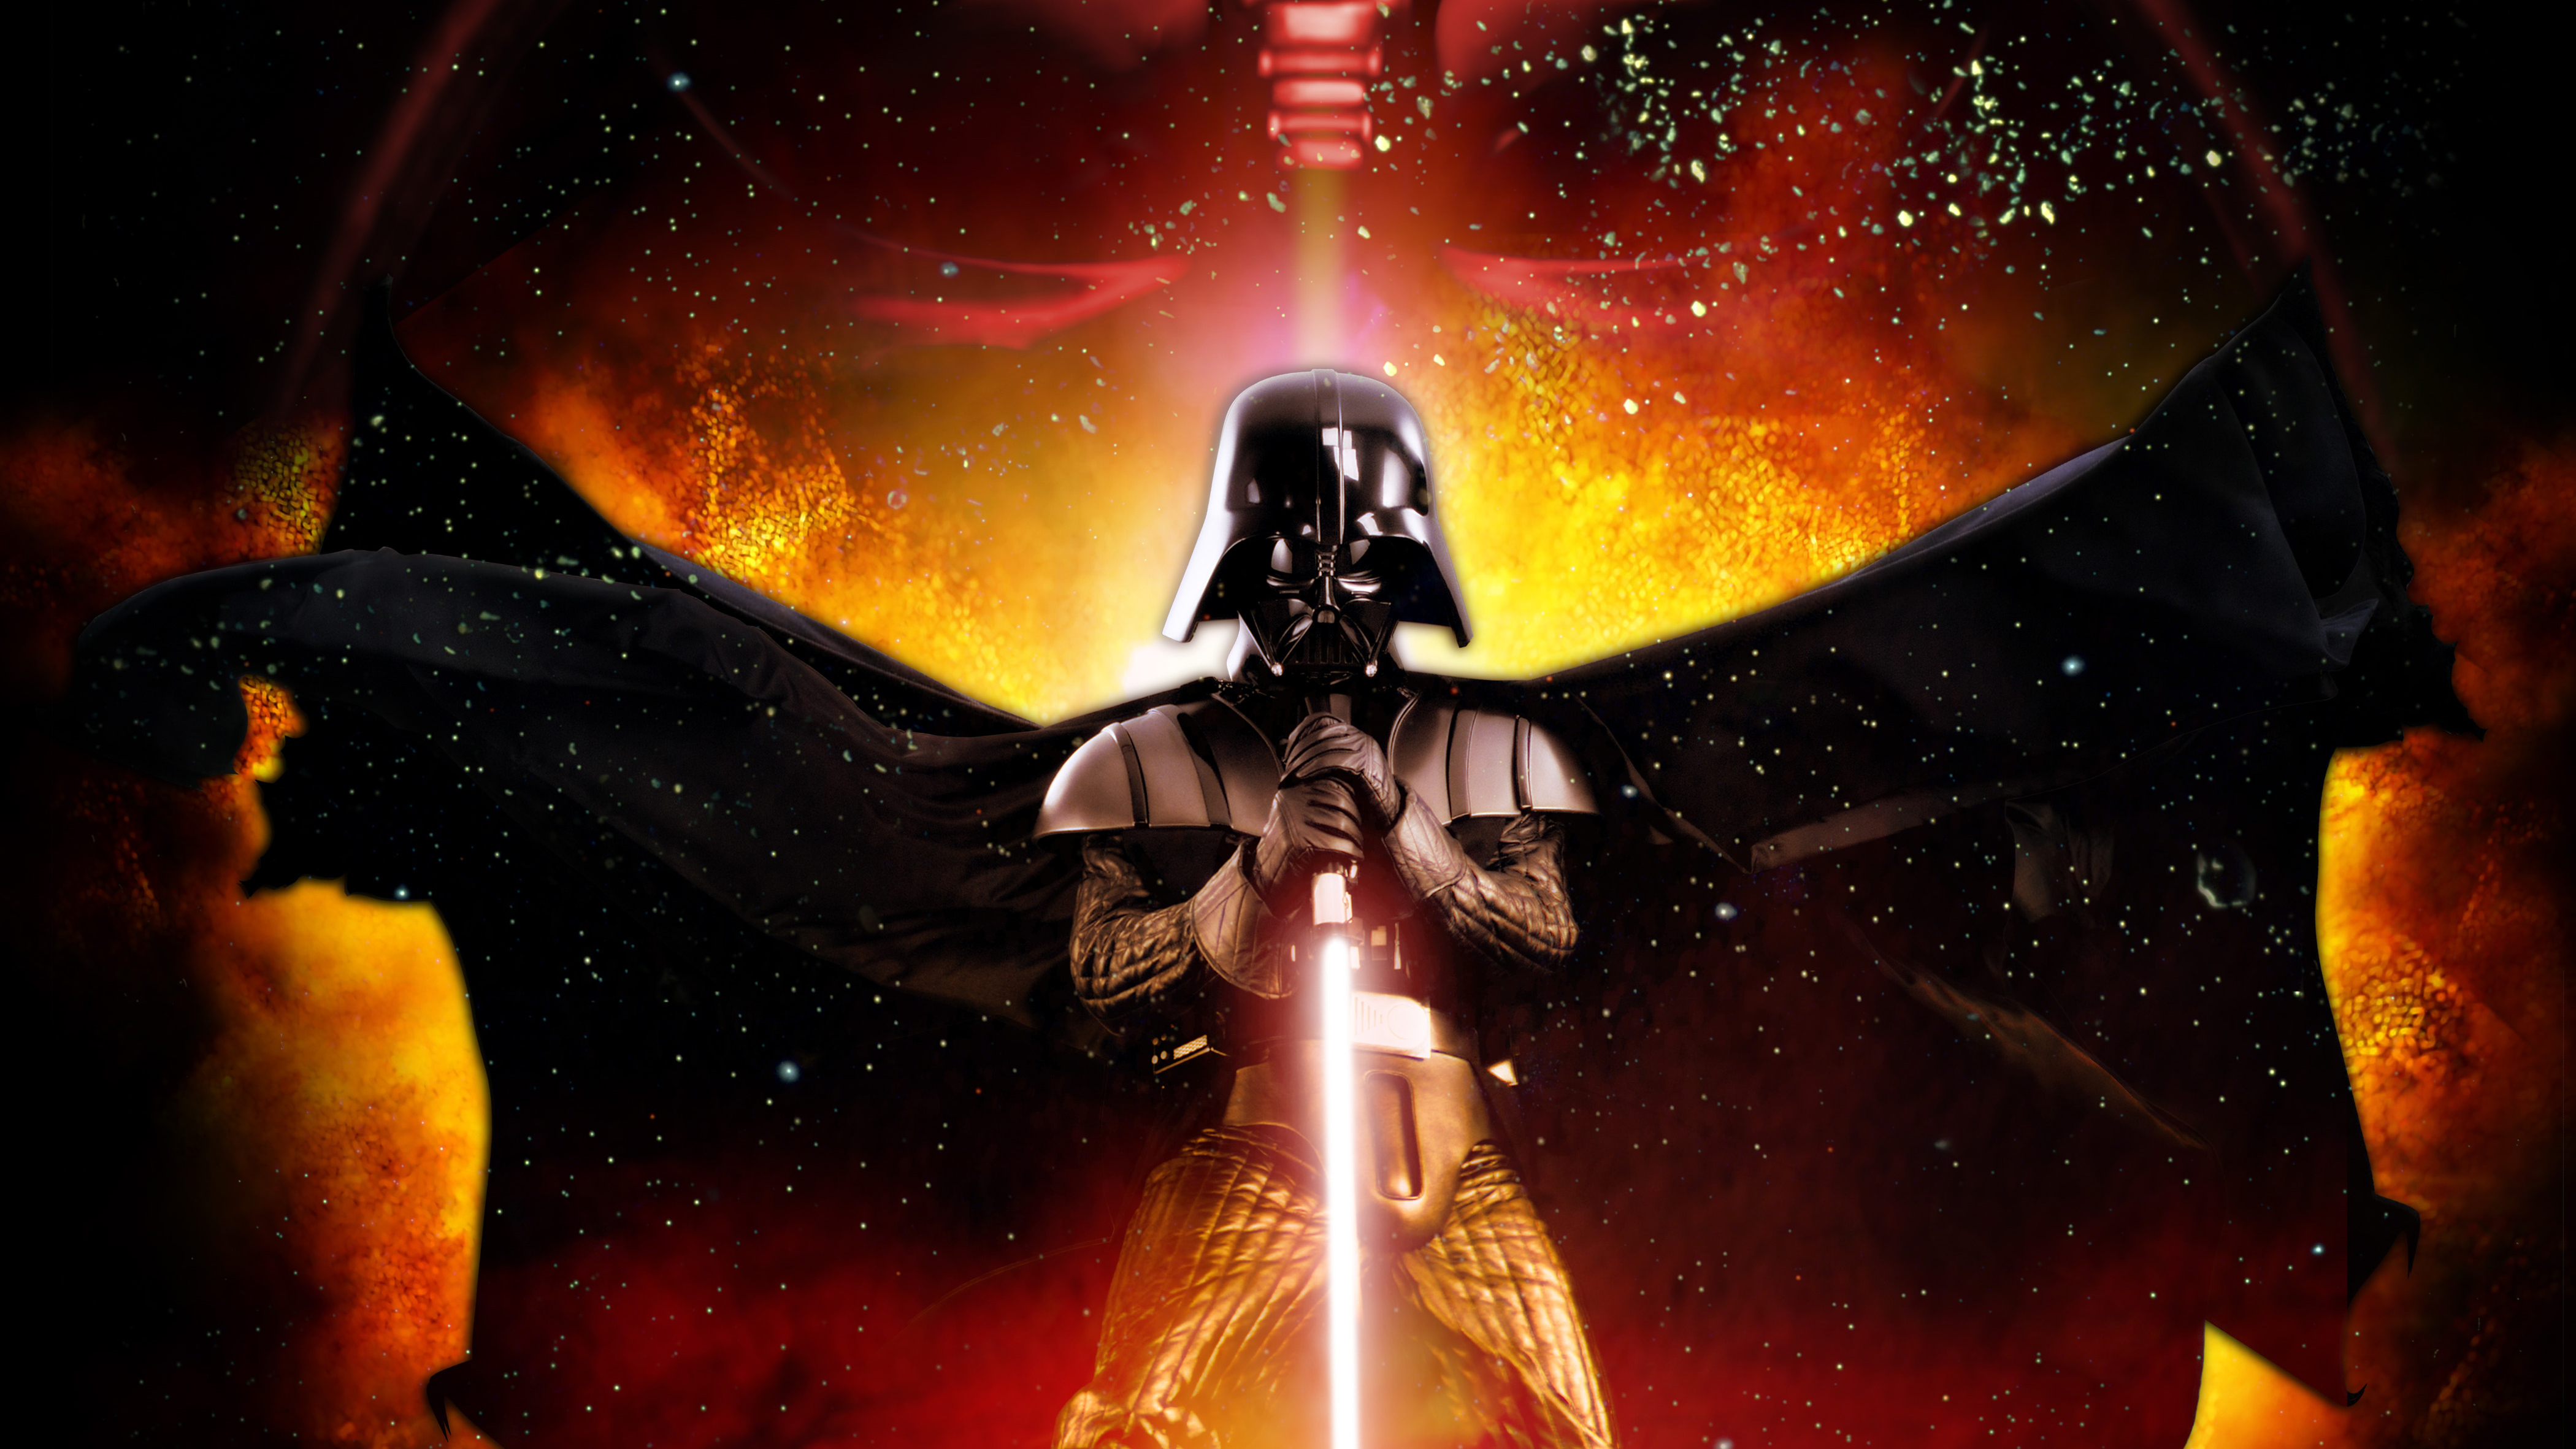 Just made some cool Star Wars Wallpapers Darth Vader and The Mandalorian   rStarWars